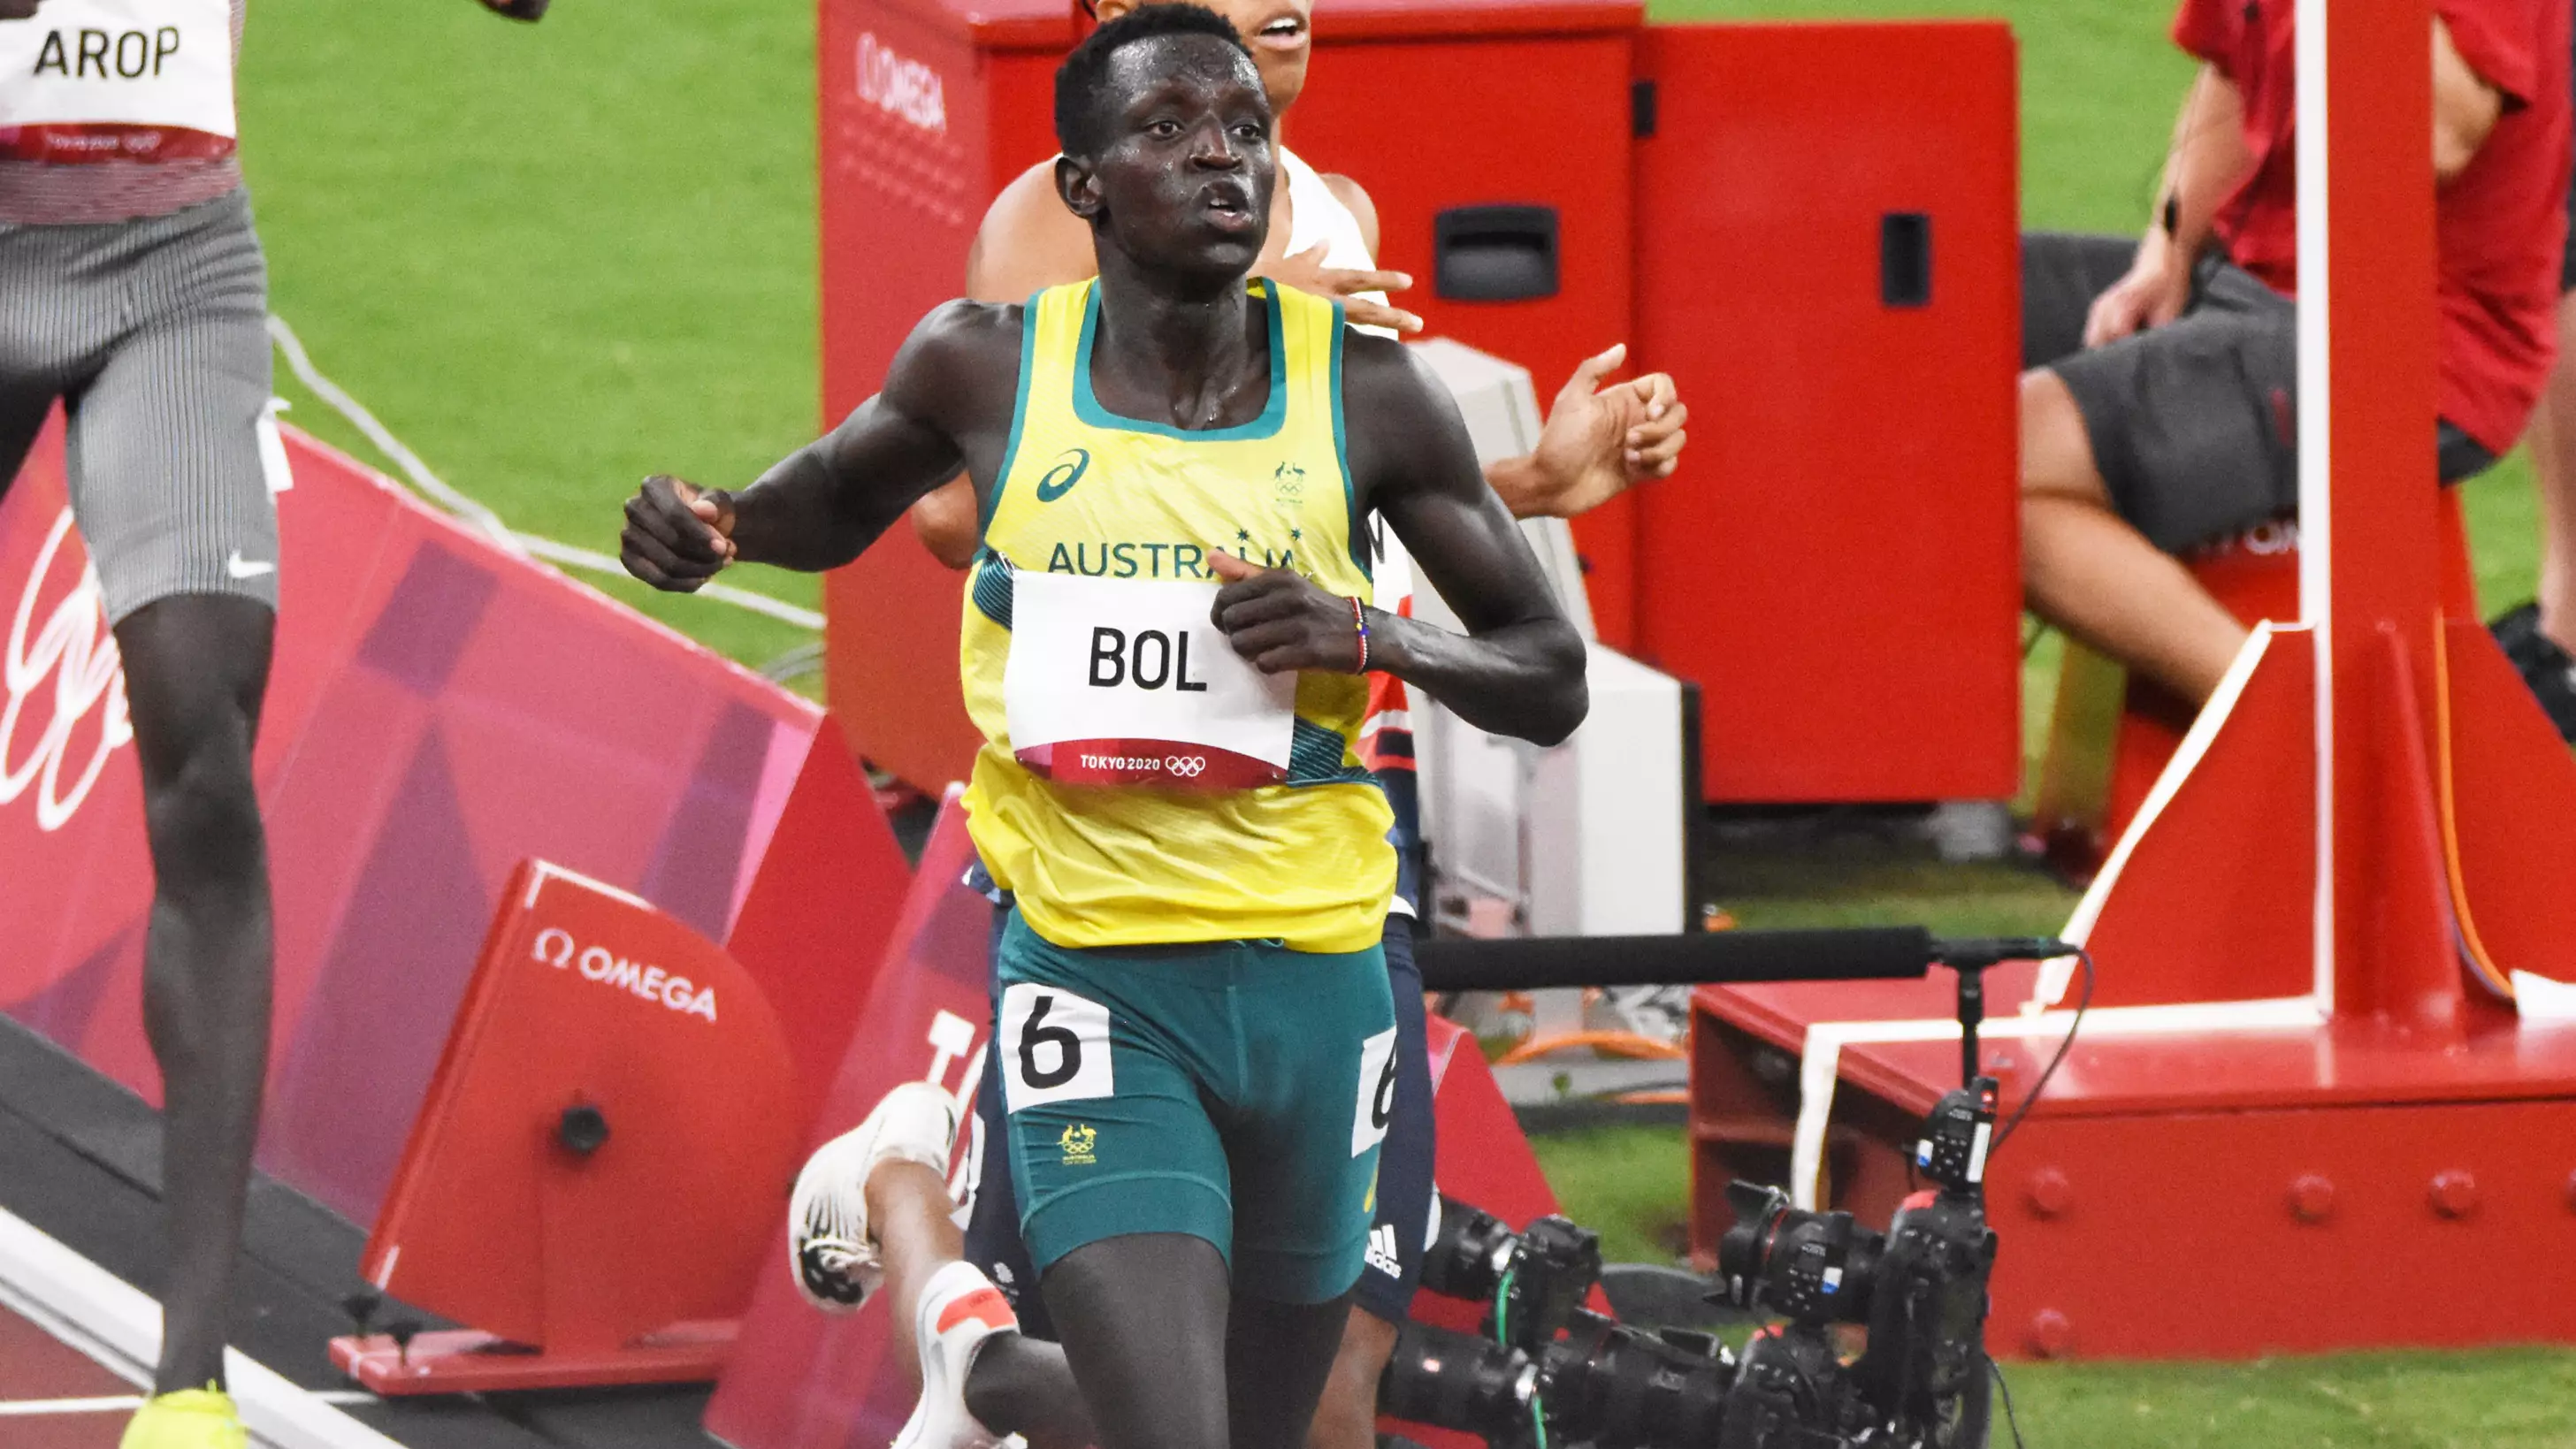 Peter Bol Delivers Beautiful Message After Missing Olympic Medal By Fraction Of A Second